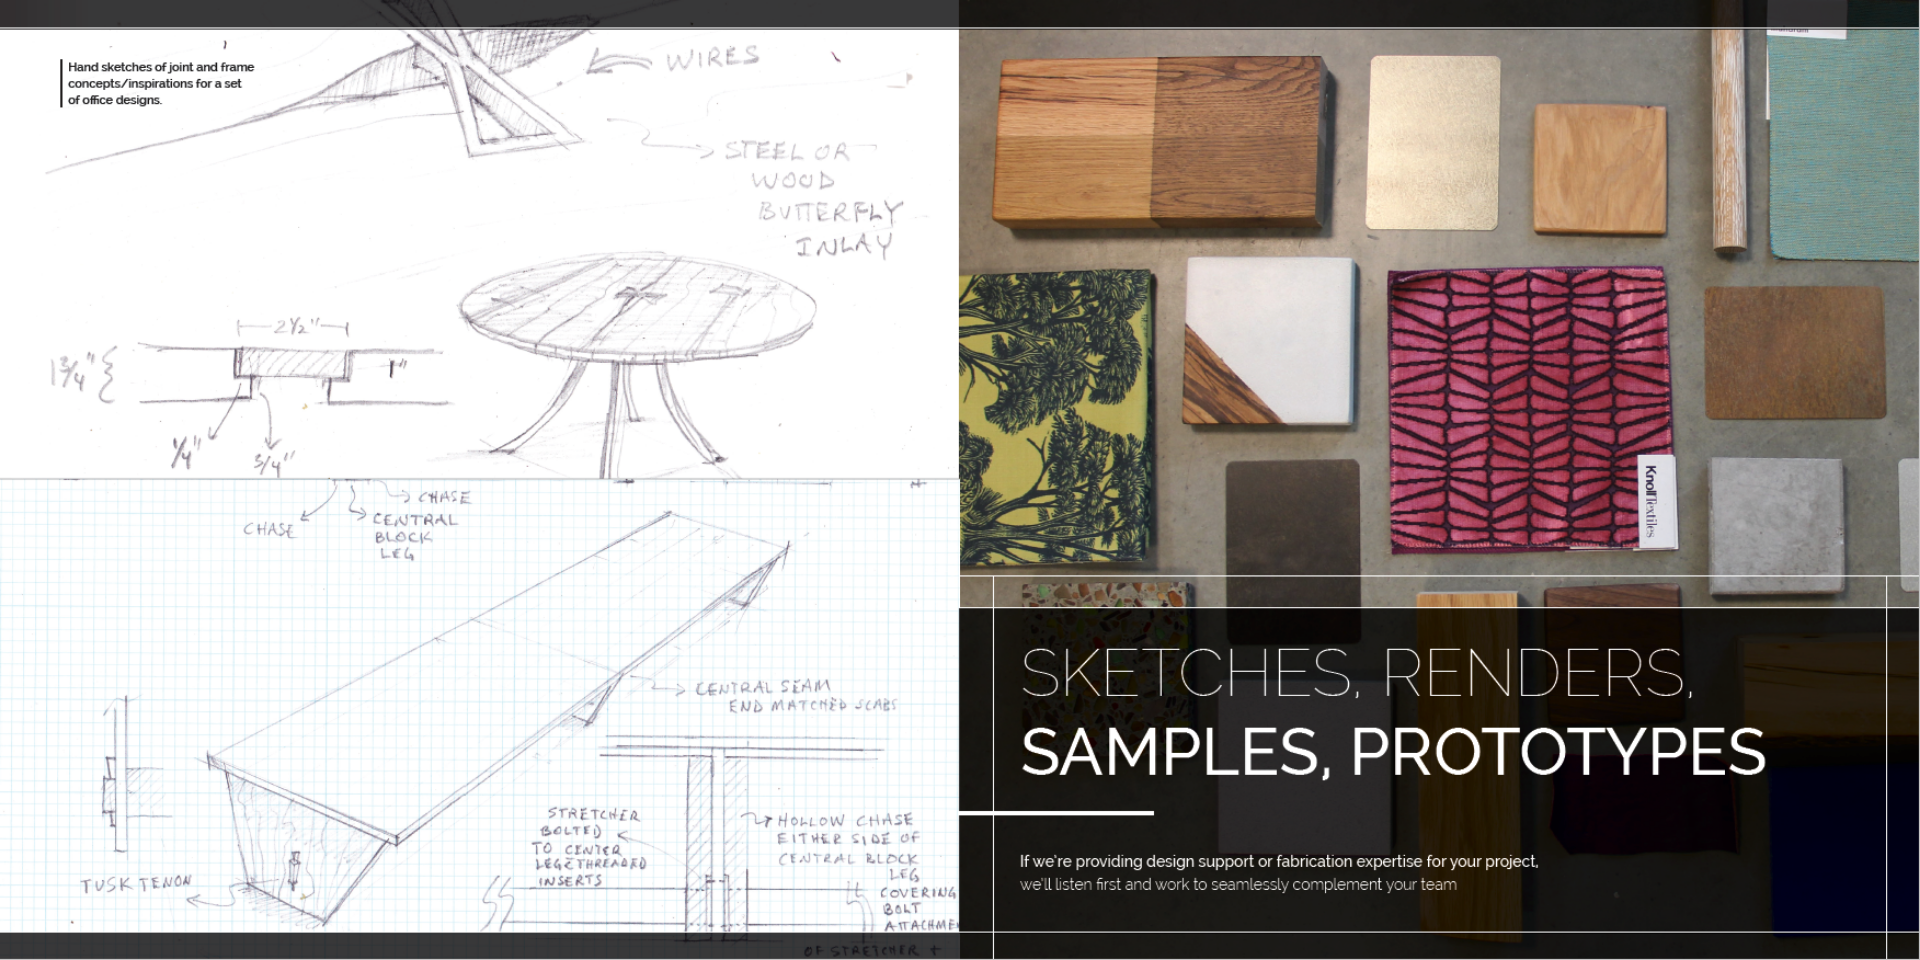 A collage showcasing the creative process of design, with conceptual sketches on the left and a variety of material samples and patterns on the right, captured under the headline "Hugo & Hoby: sketches,